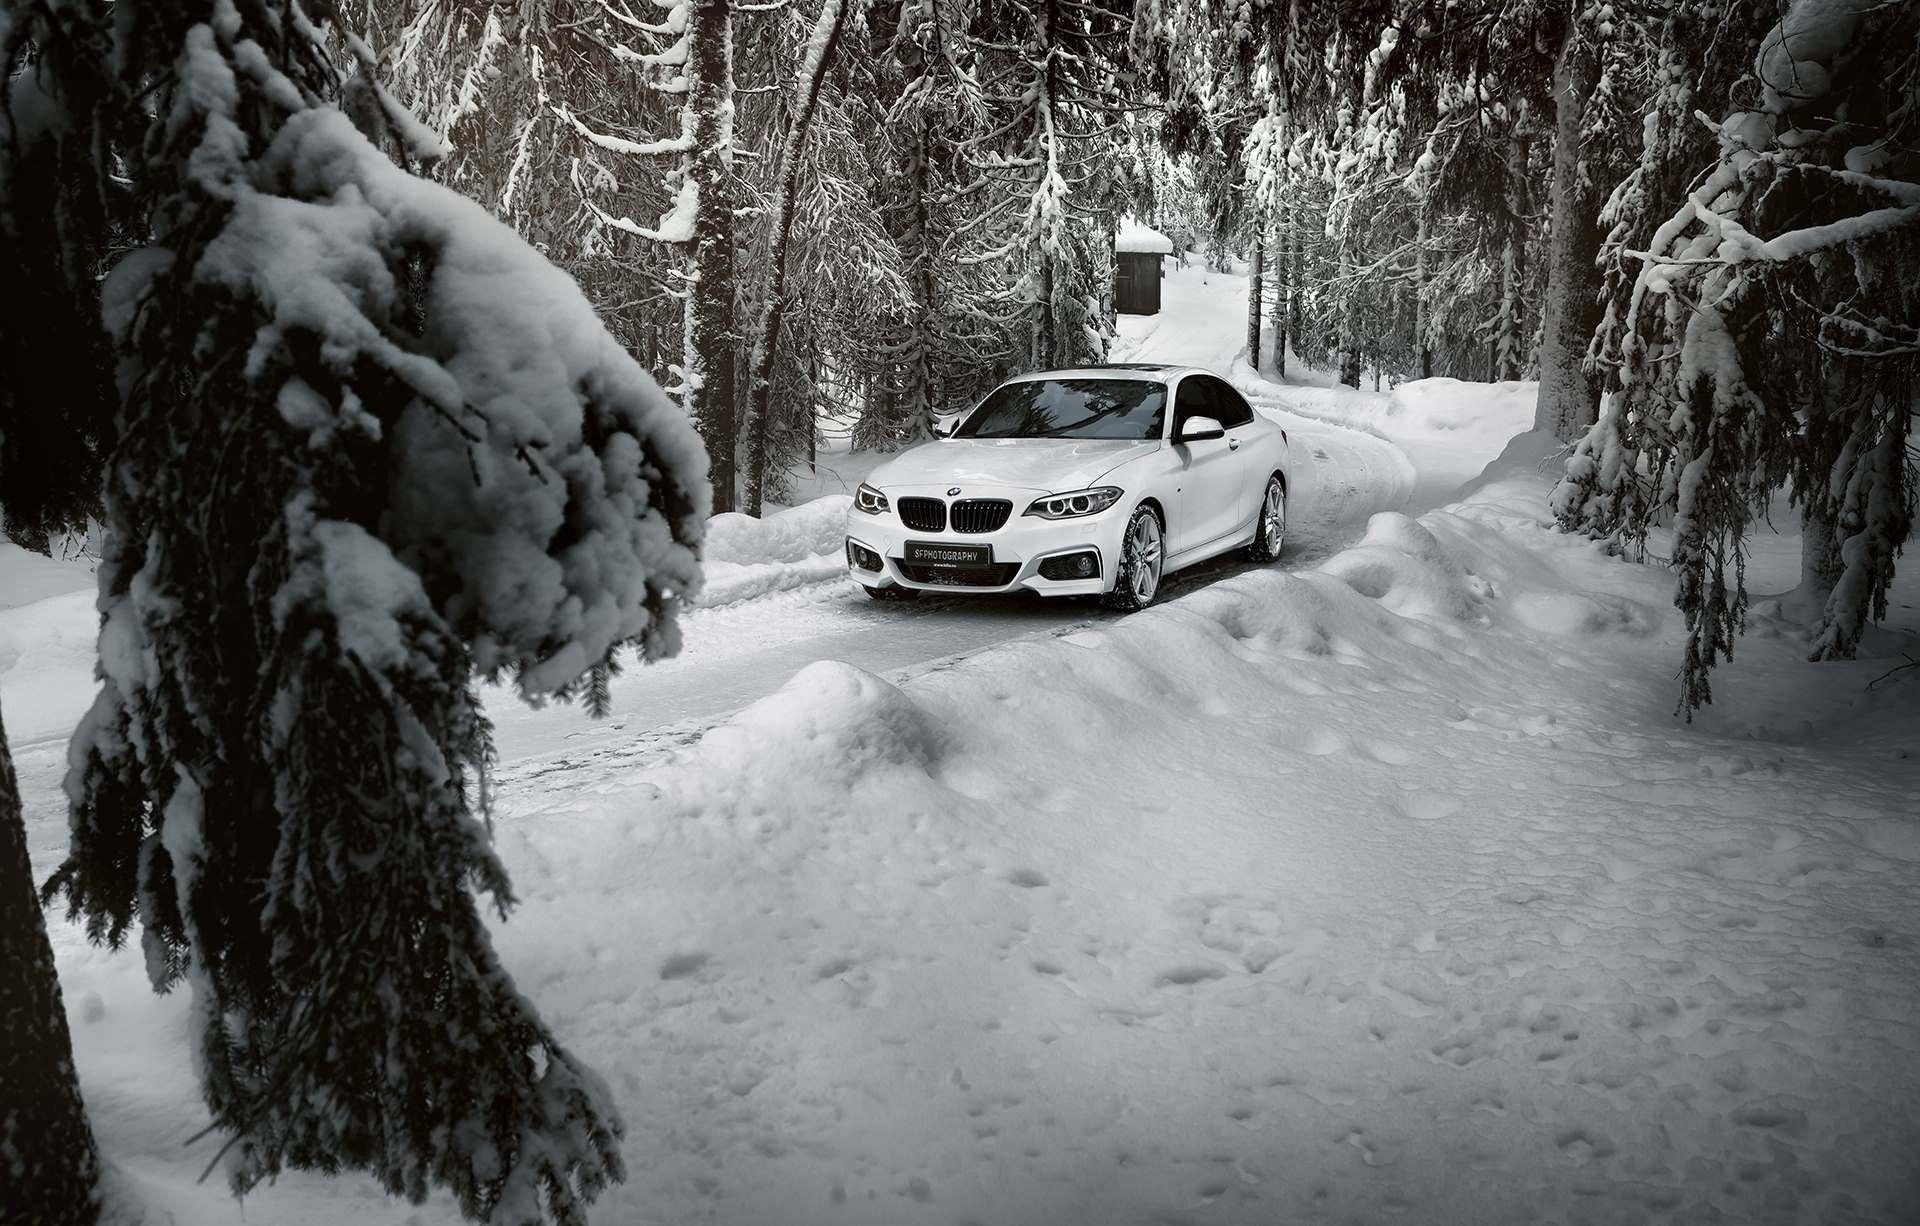 Wallpaper Cars Photo Picture Bmw Winter Snow Forest